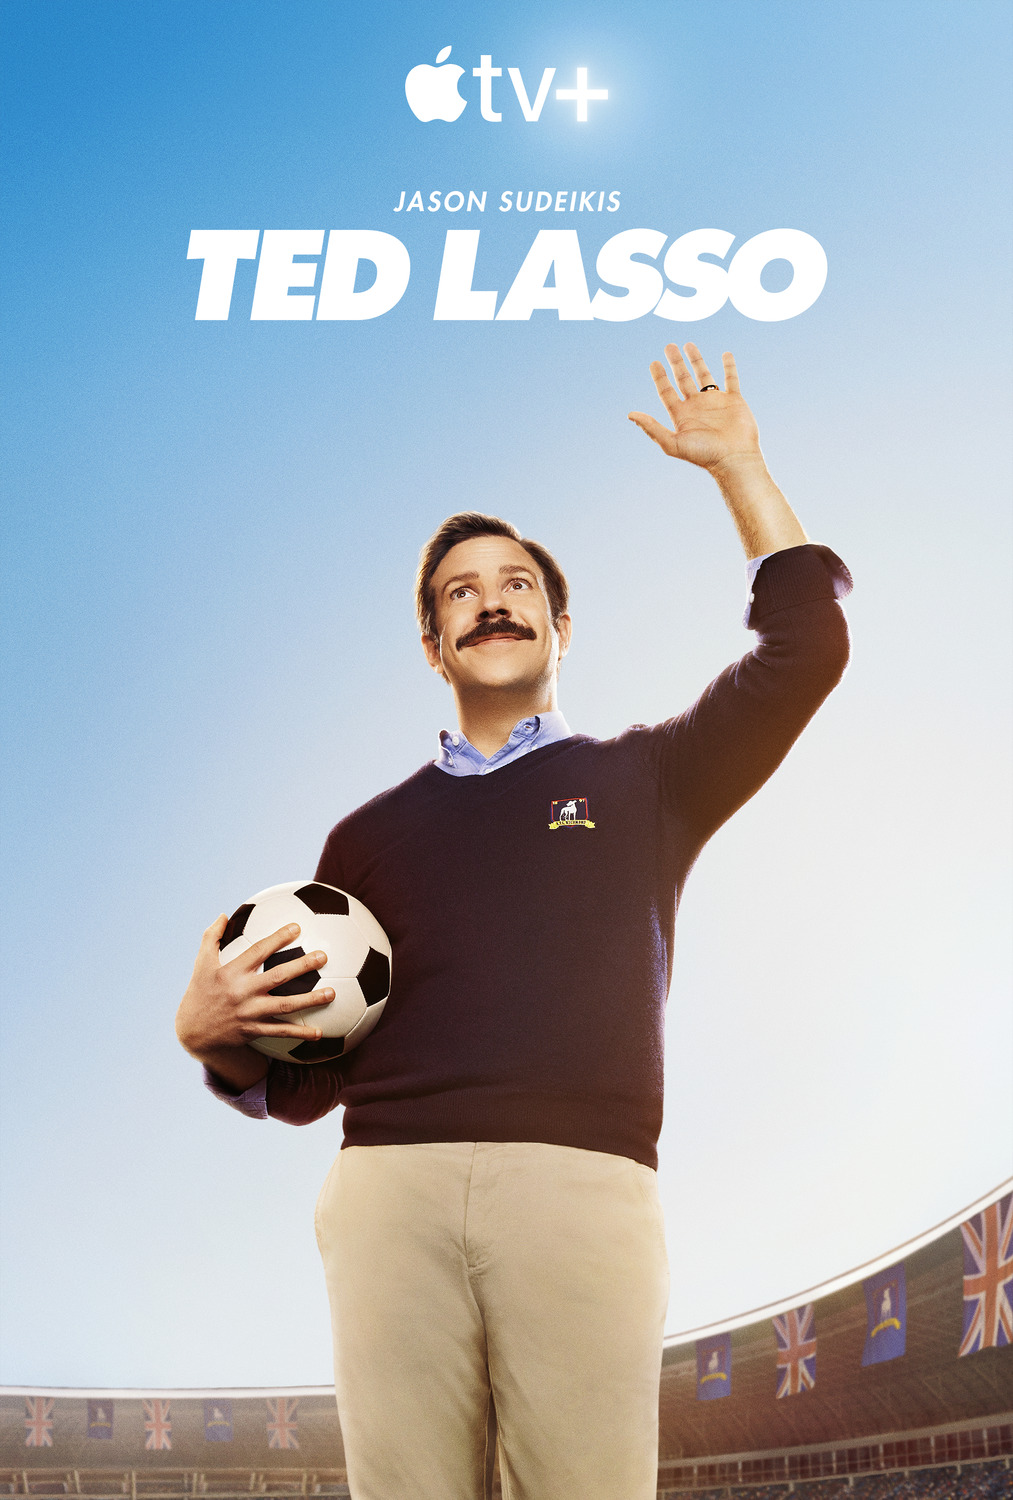 Ted Lasso (#1 of 6): Extra Large TV Poster Image - IMP Awards